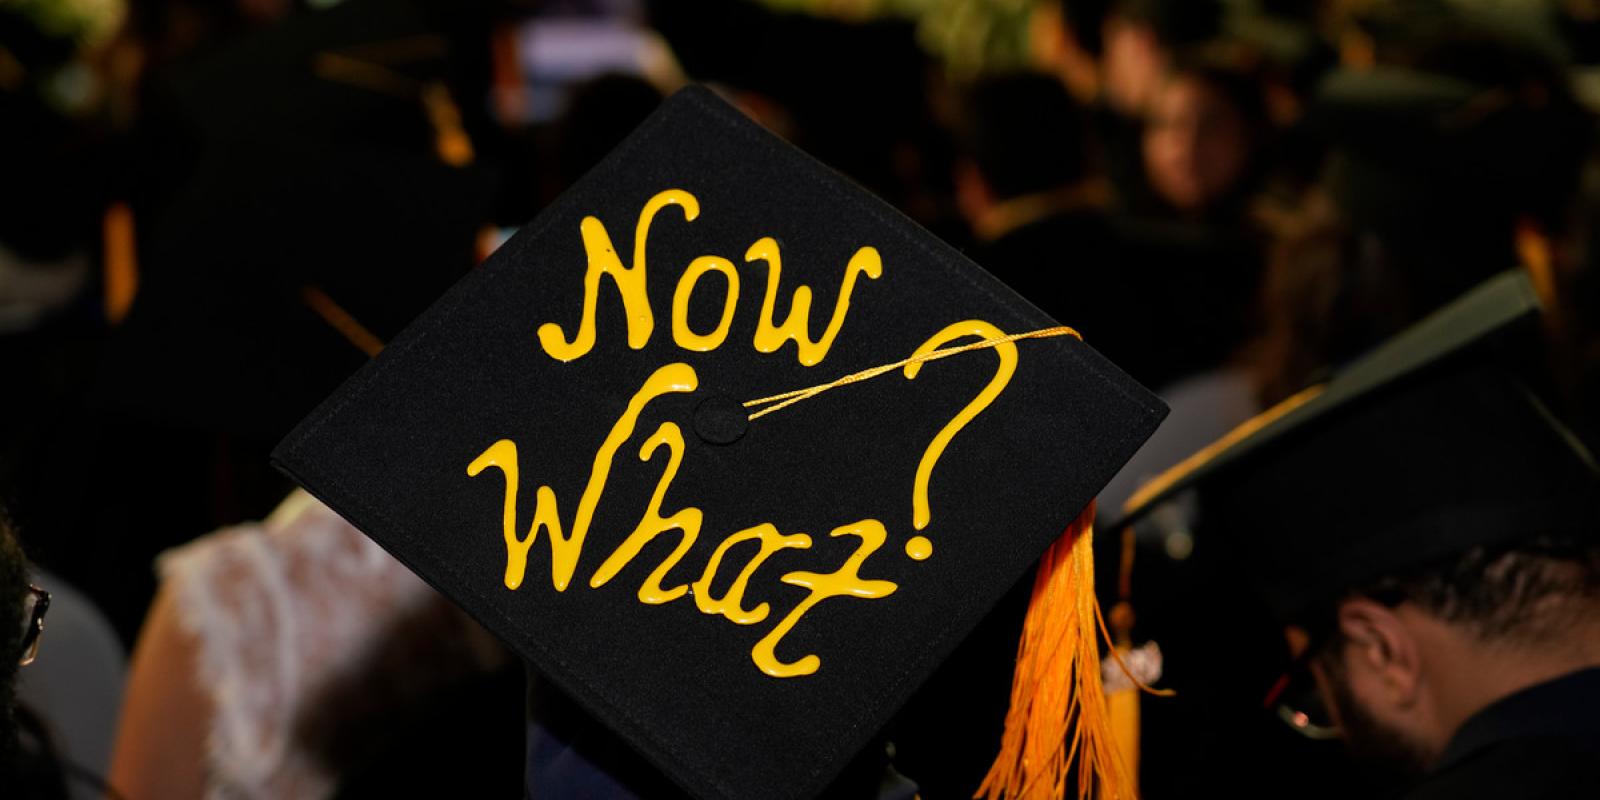 text written on cap of graduation "Now What?"